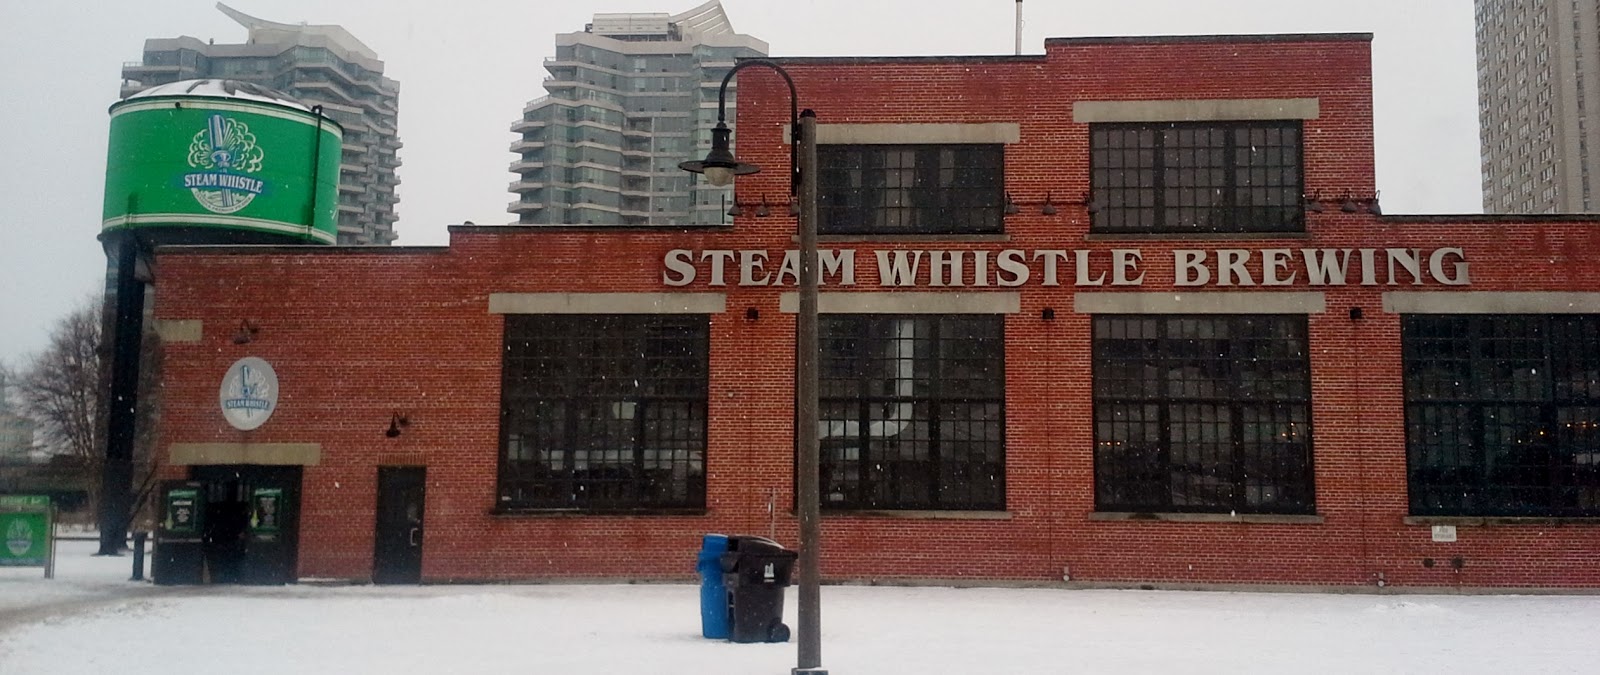 Steam Whistle Winter Farmers Market in Toronto Beer brewery lifestyle fashionblogger event food fresh fruit meats and cheeses every Suday